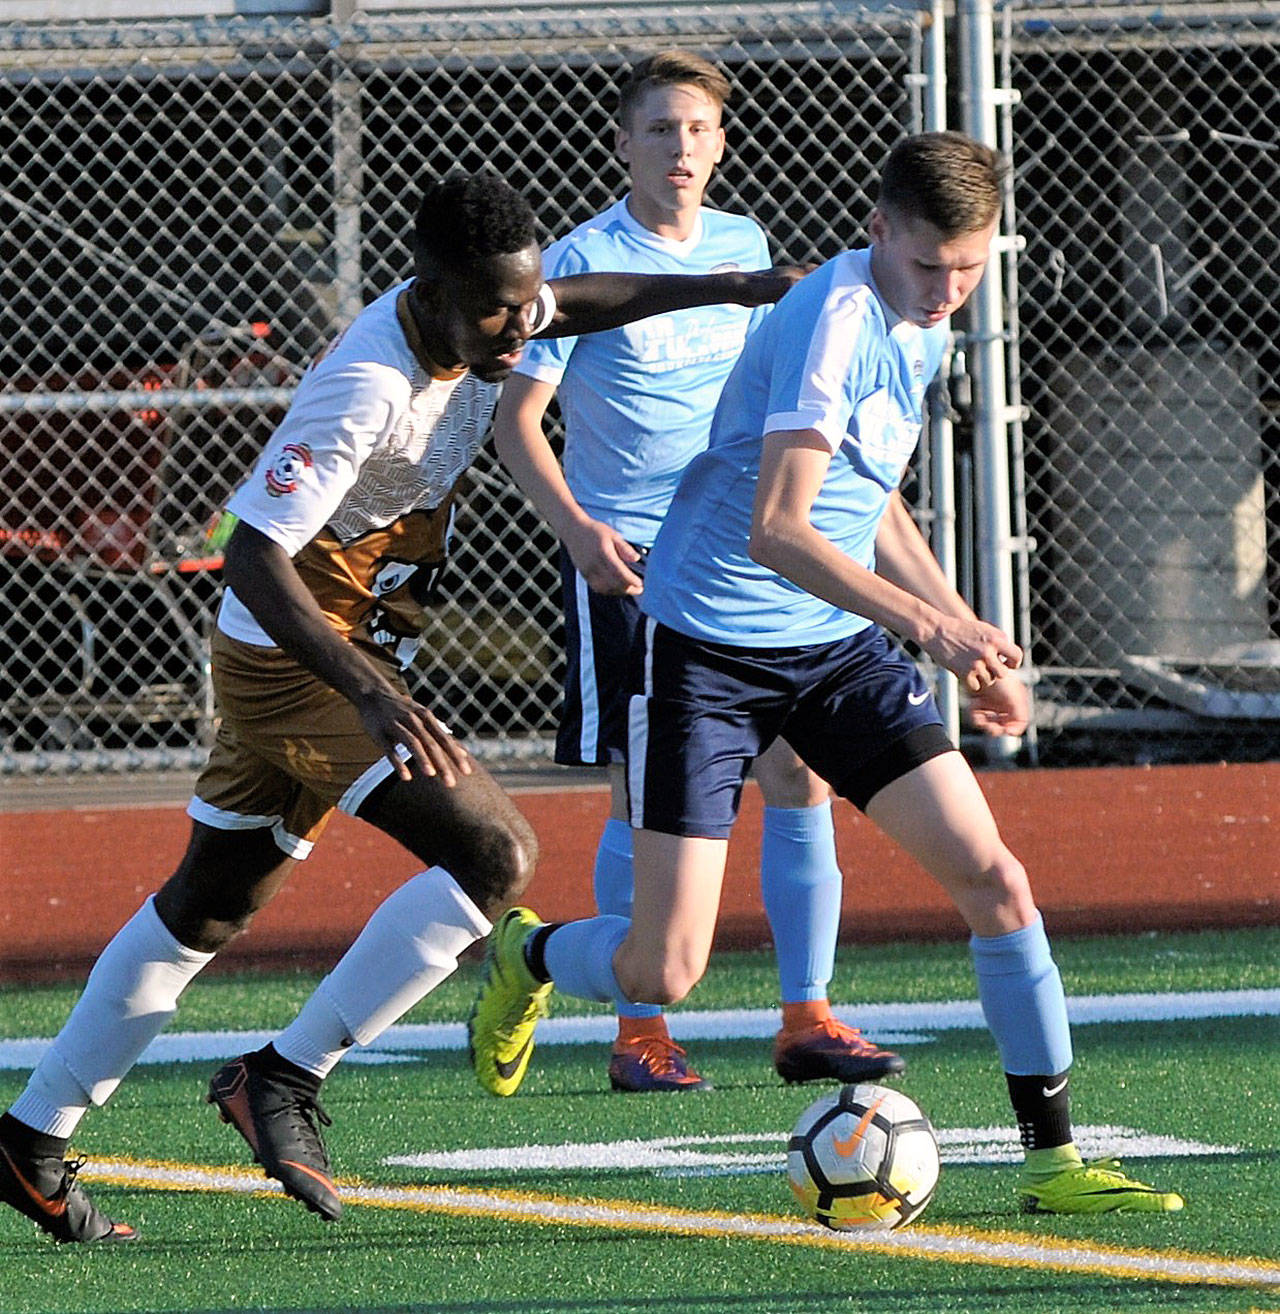 Grays Harbor’s Alex Pugadelarosa, right, looks for space around midfield while fending off a tackle against Lacy FC on Saturday. (Hasani Grayson | The Daily World)